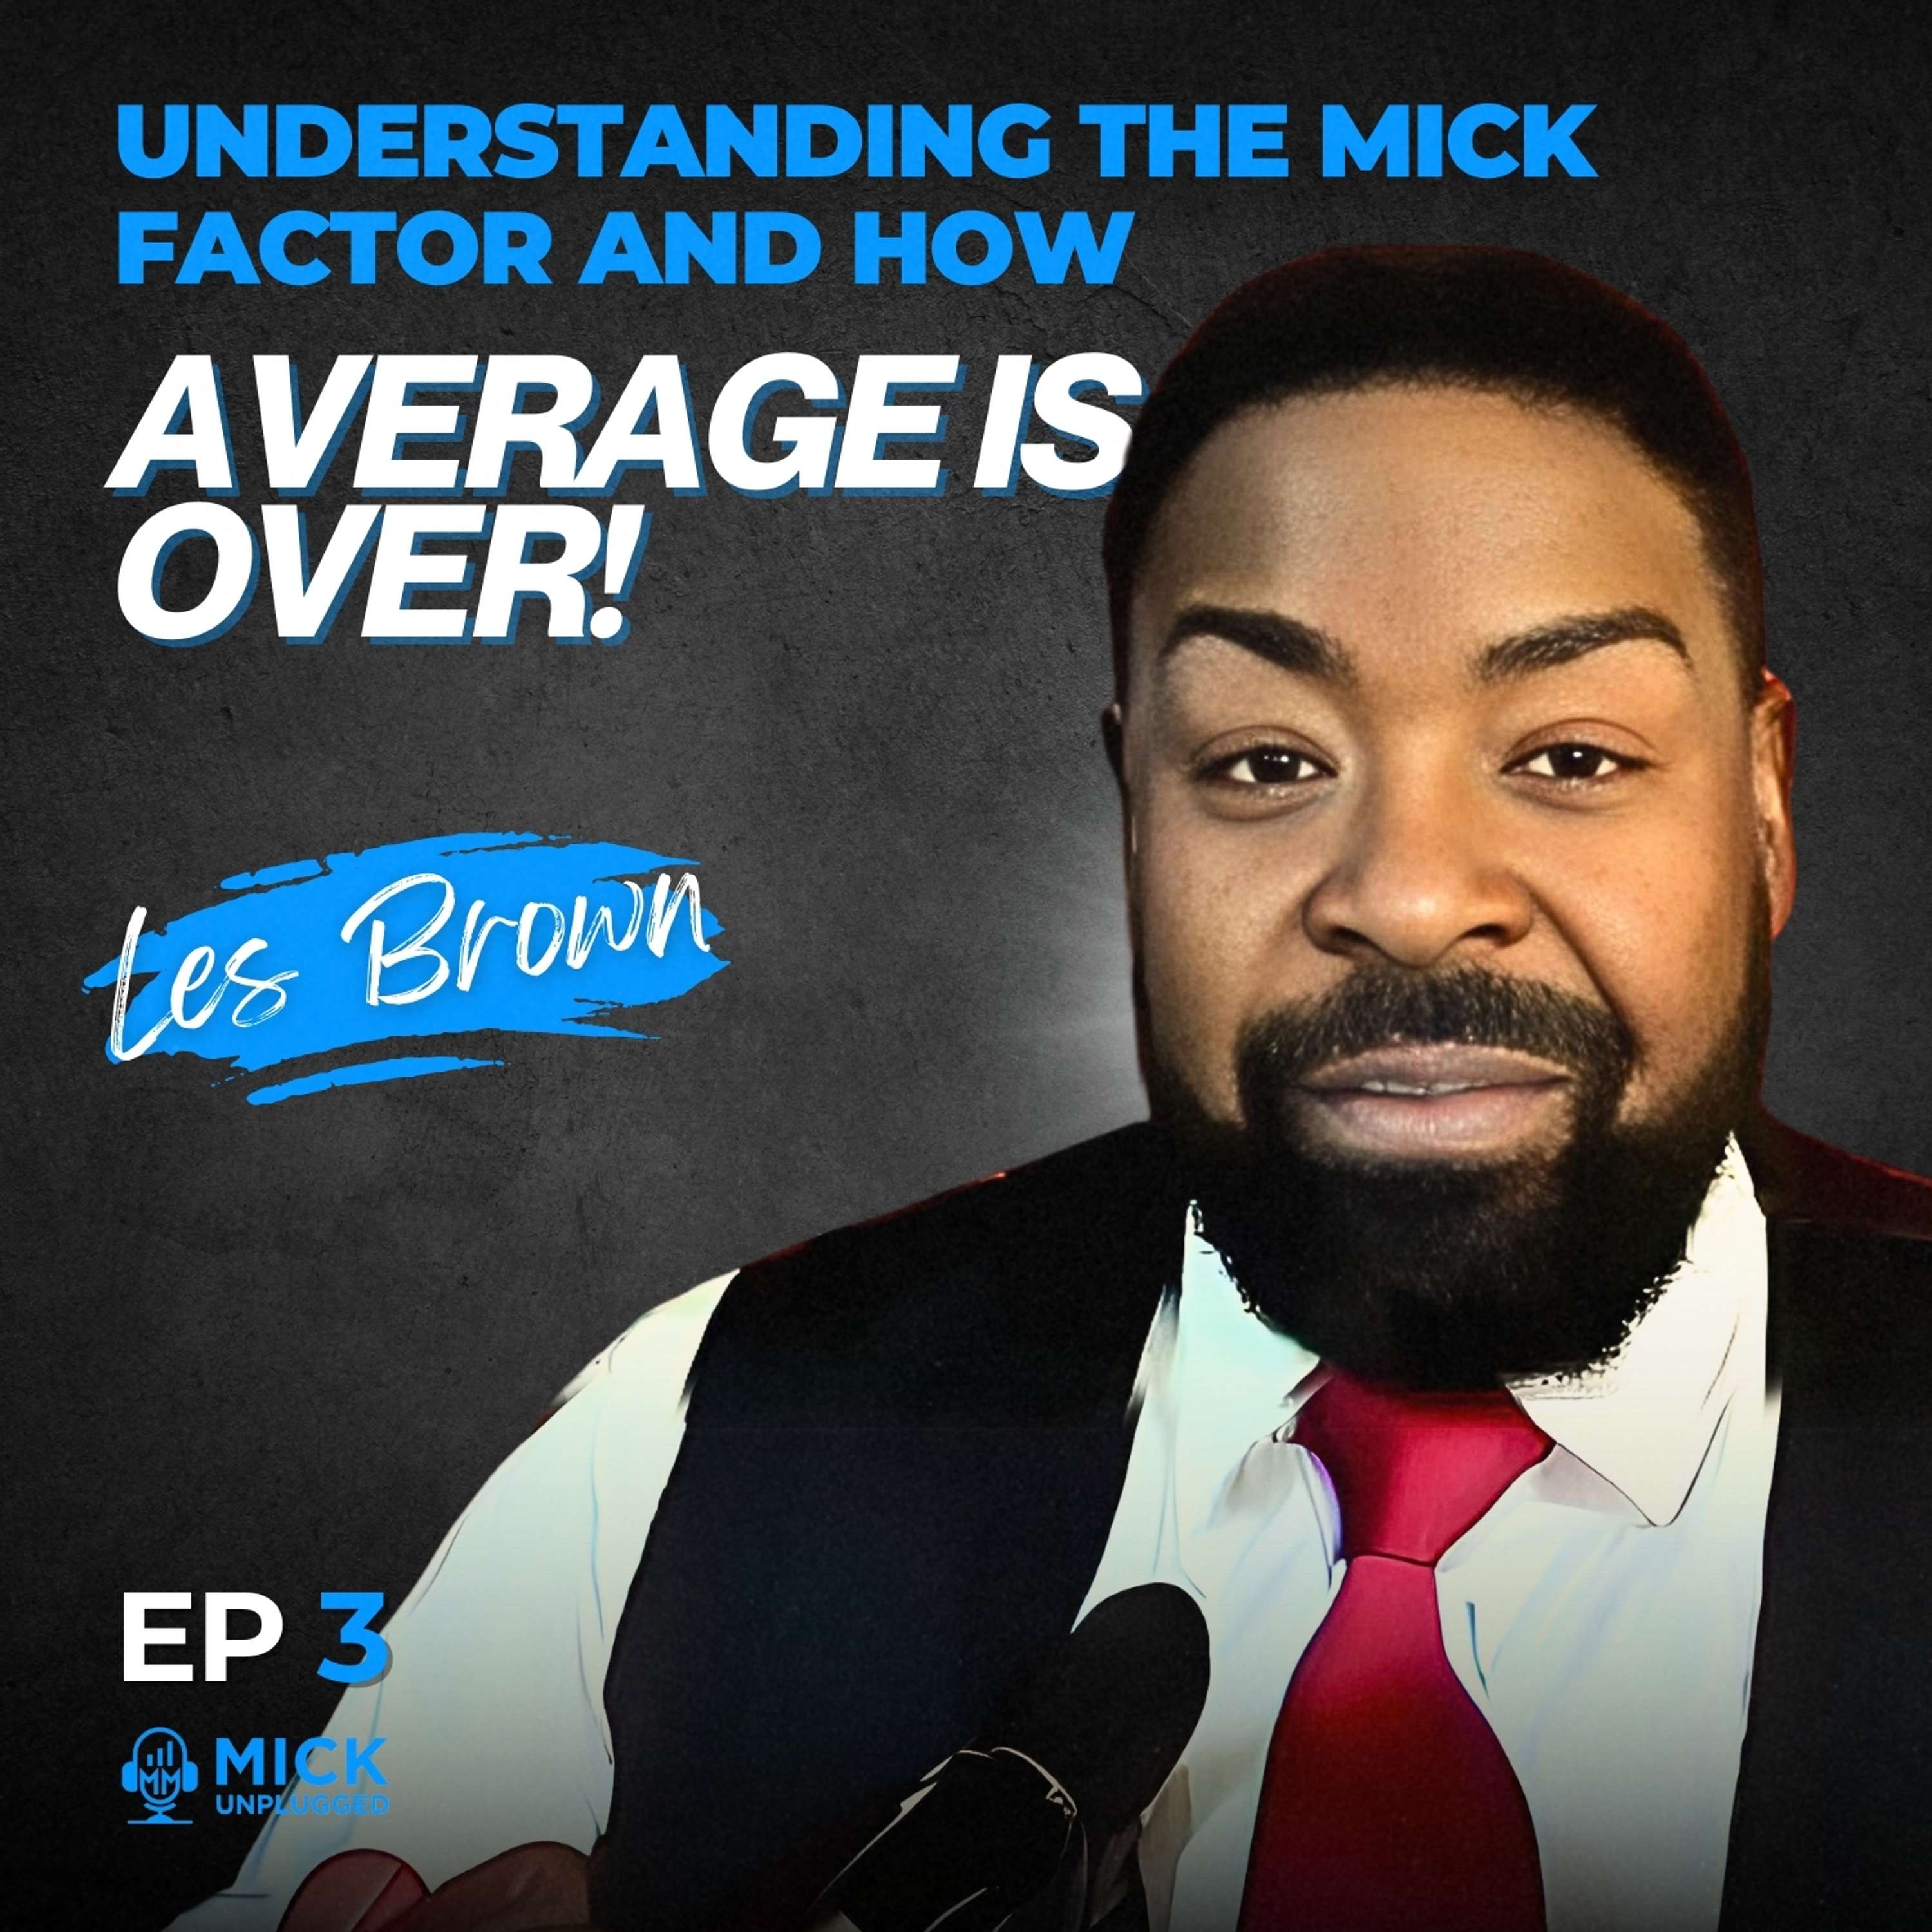 Les Brown | Understanding the Mick Factor and How Average is Over! - Mick Unplugged [Ep 3]